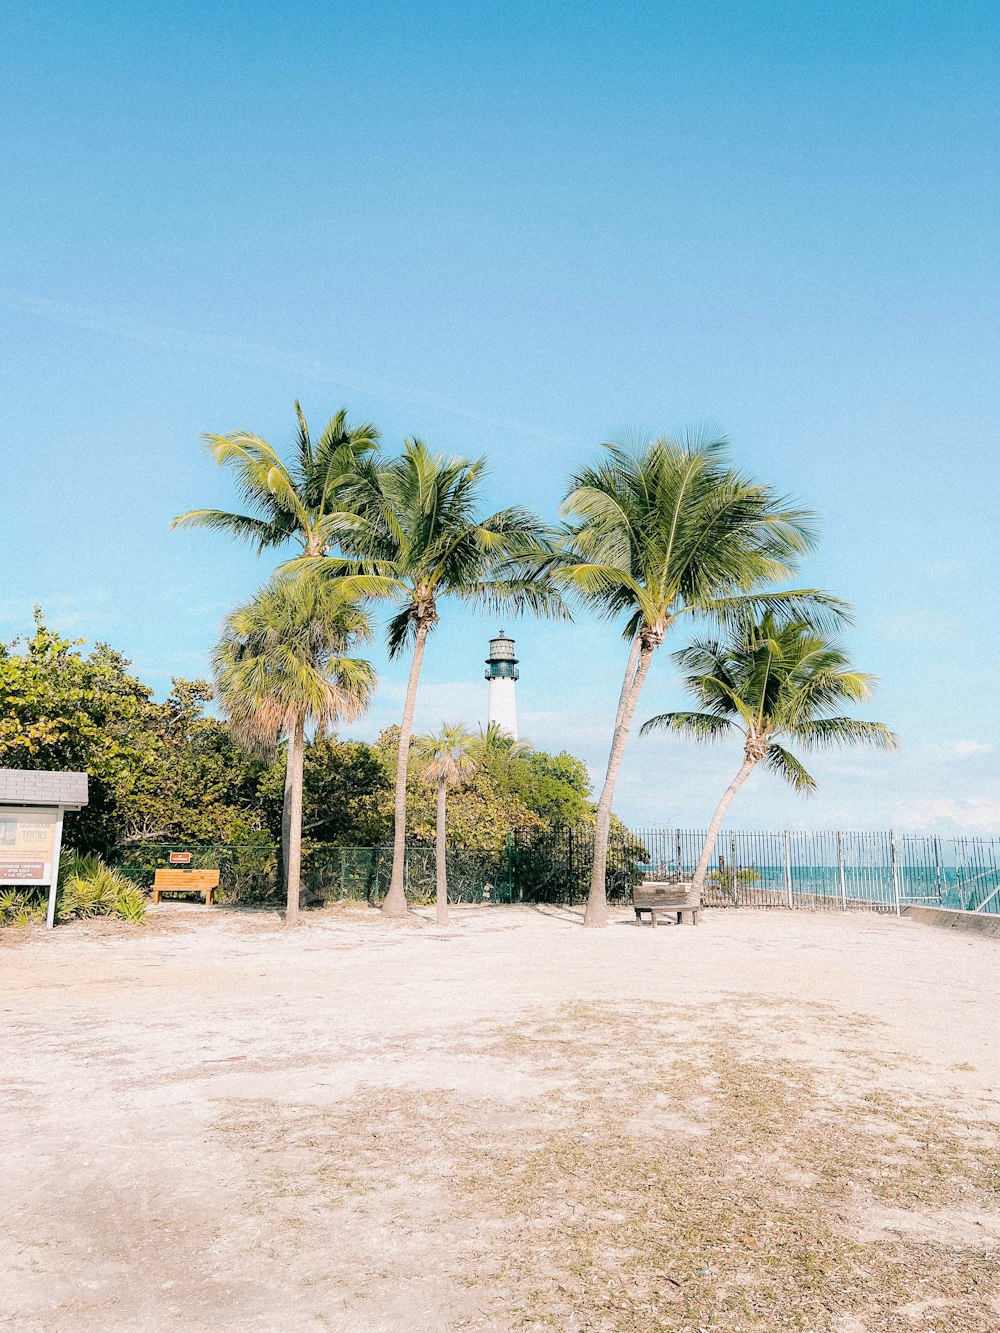 a beach with palm trees and a light house in the background